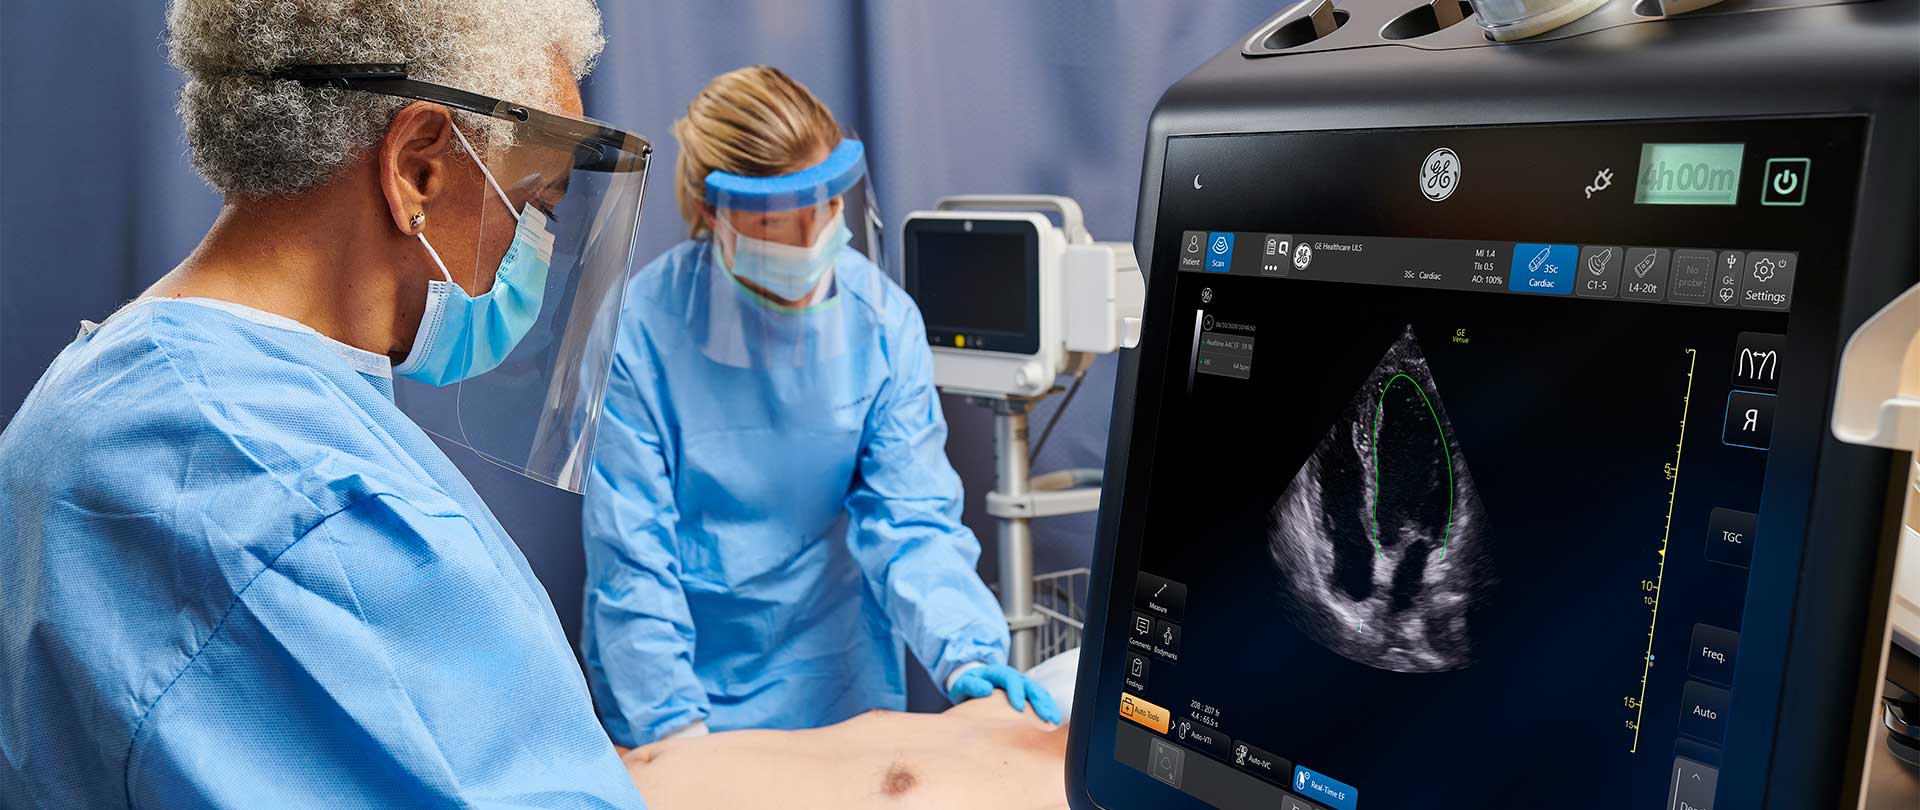 Doctor assessing patient using Venue technology in operating room